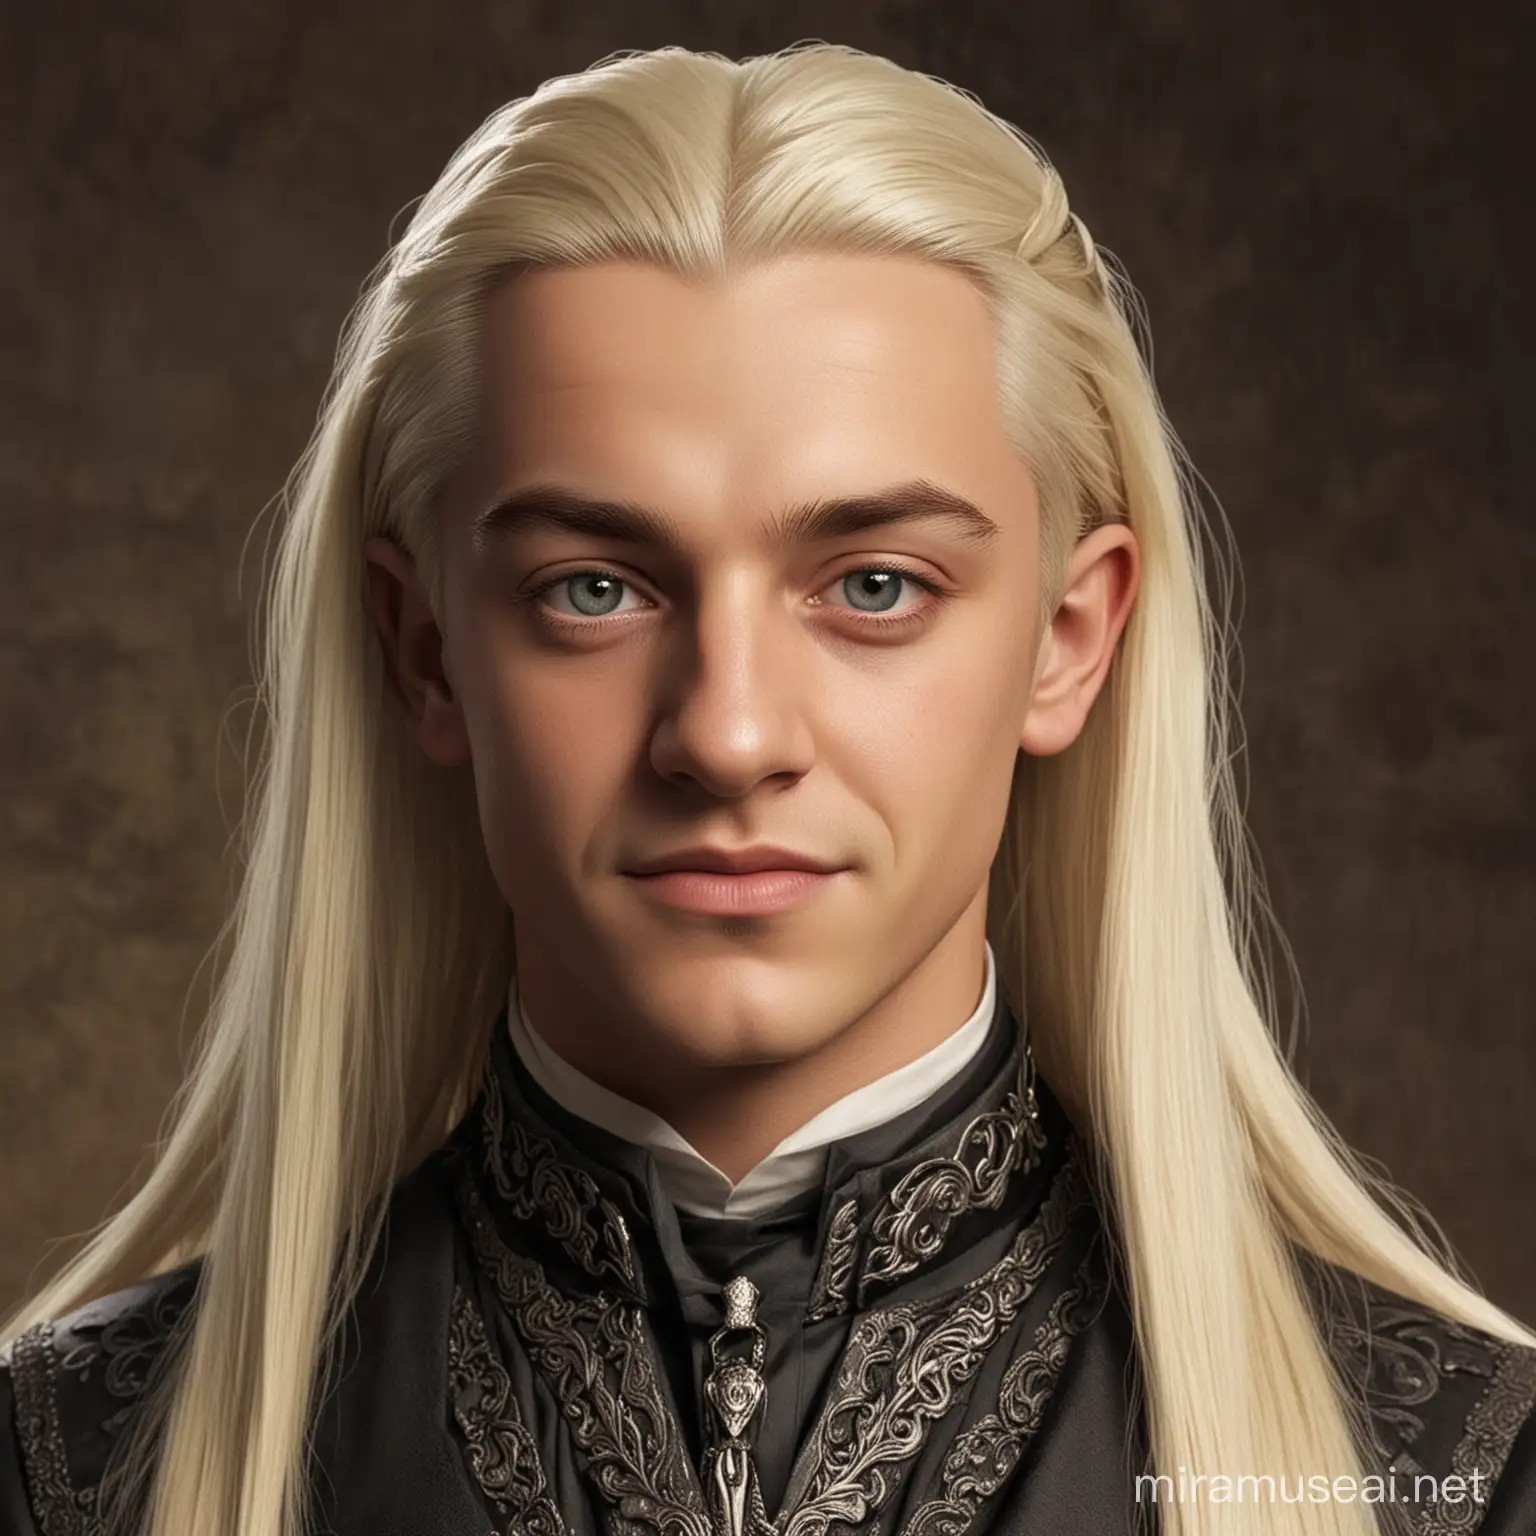 Young Lucius Malfoy Portrait Slytherin Student with a Dark Elegance